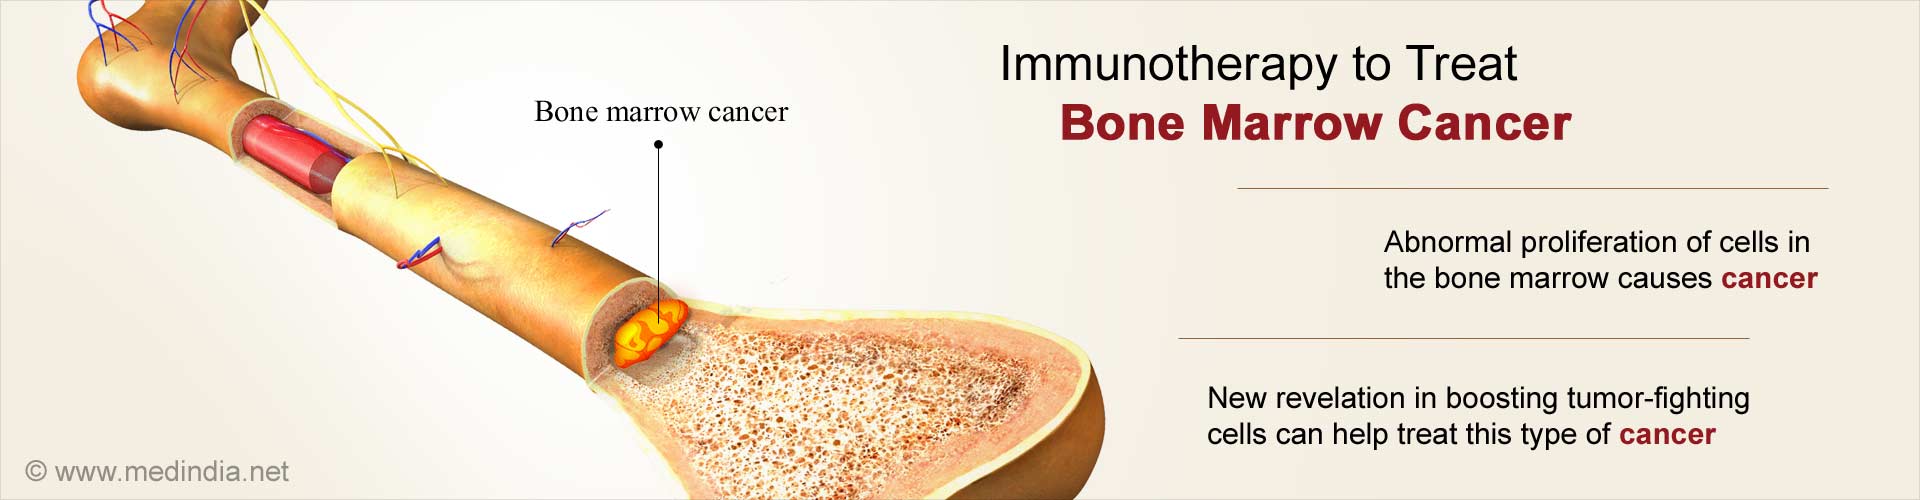 Immunotherapy to treat bone marrow cancer
- Abnormal proliferation of cells in the bone marrow causes cancer
- New revelation in boosting tumor-fighting cells can help treat this type of cancer